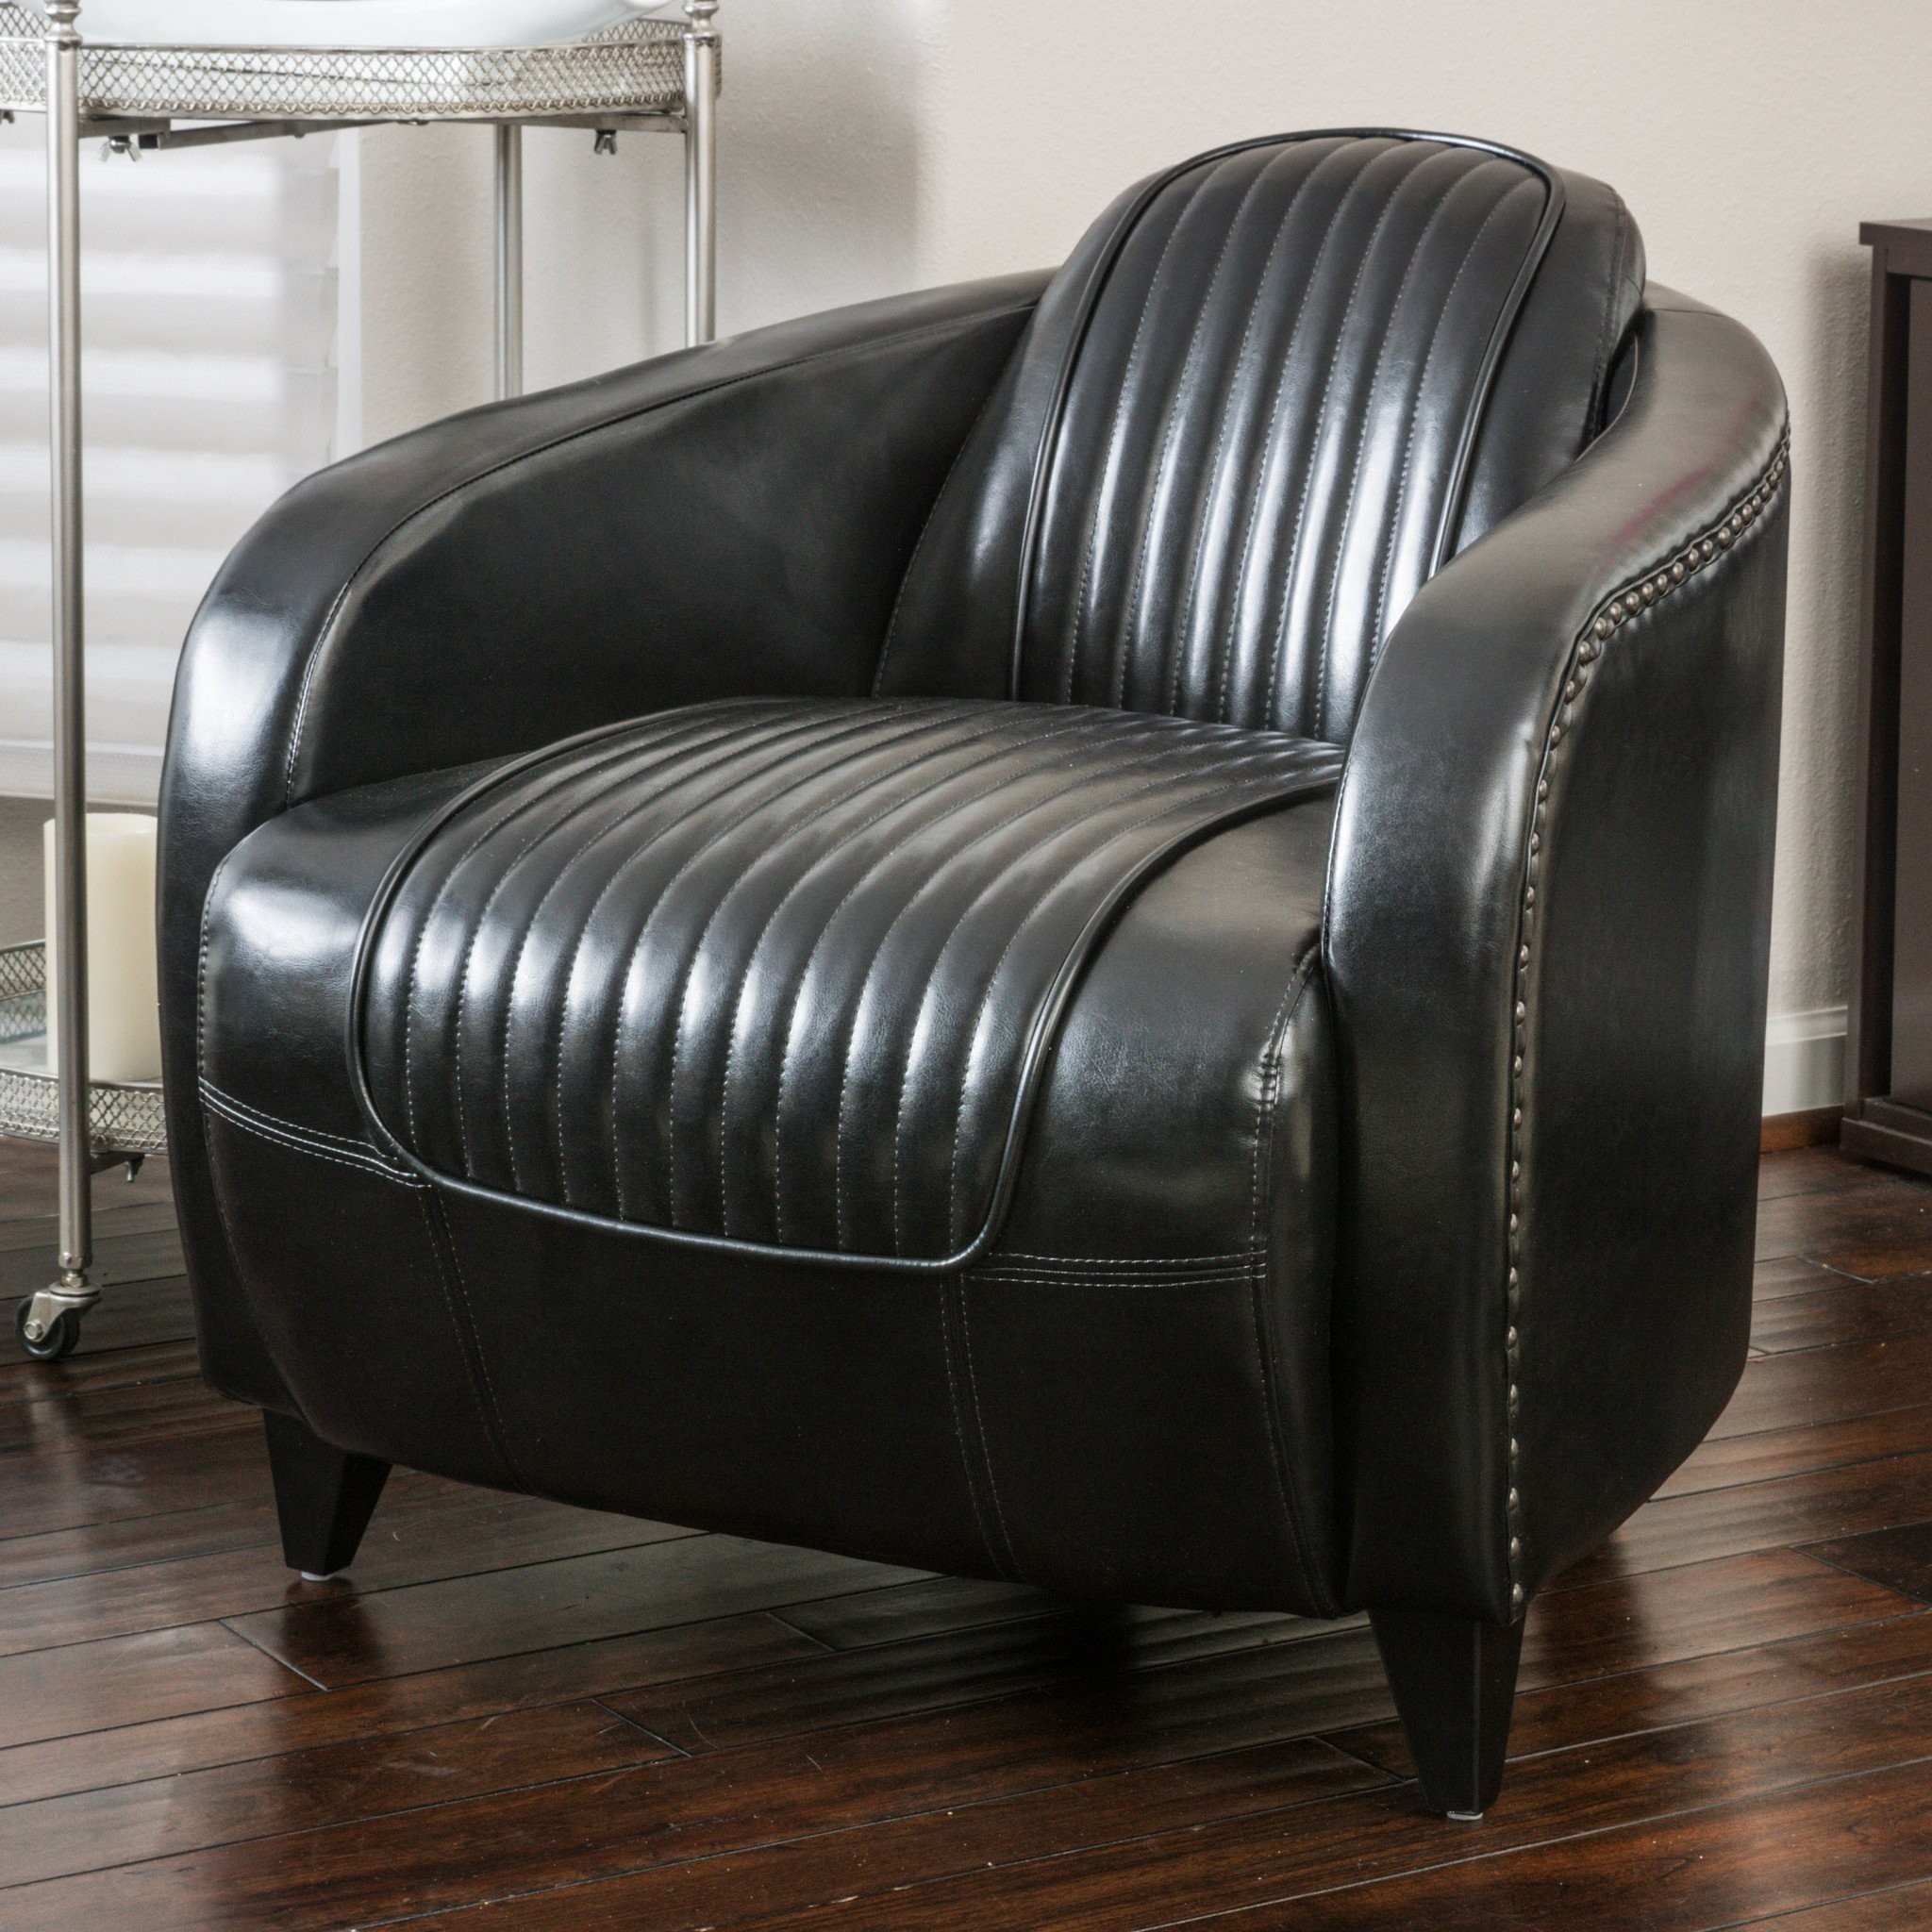 Lemay Channeled Black Leather Club Chair